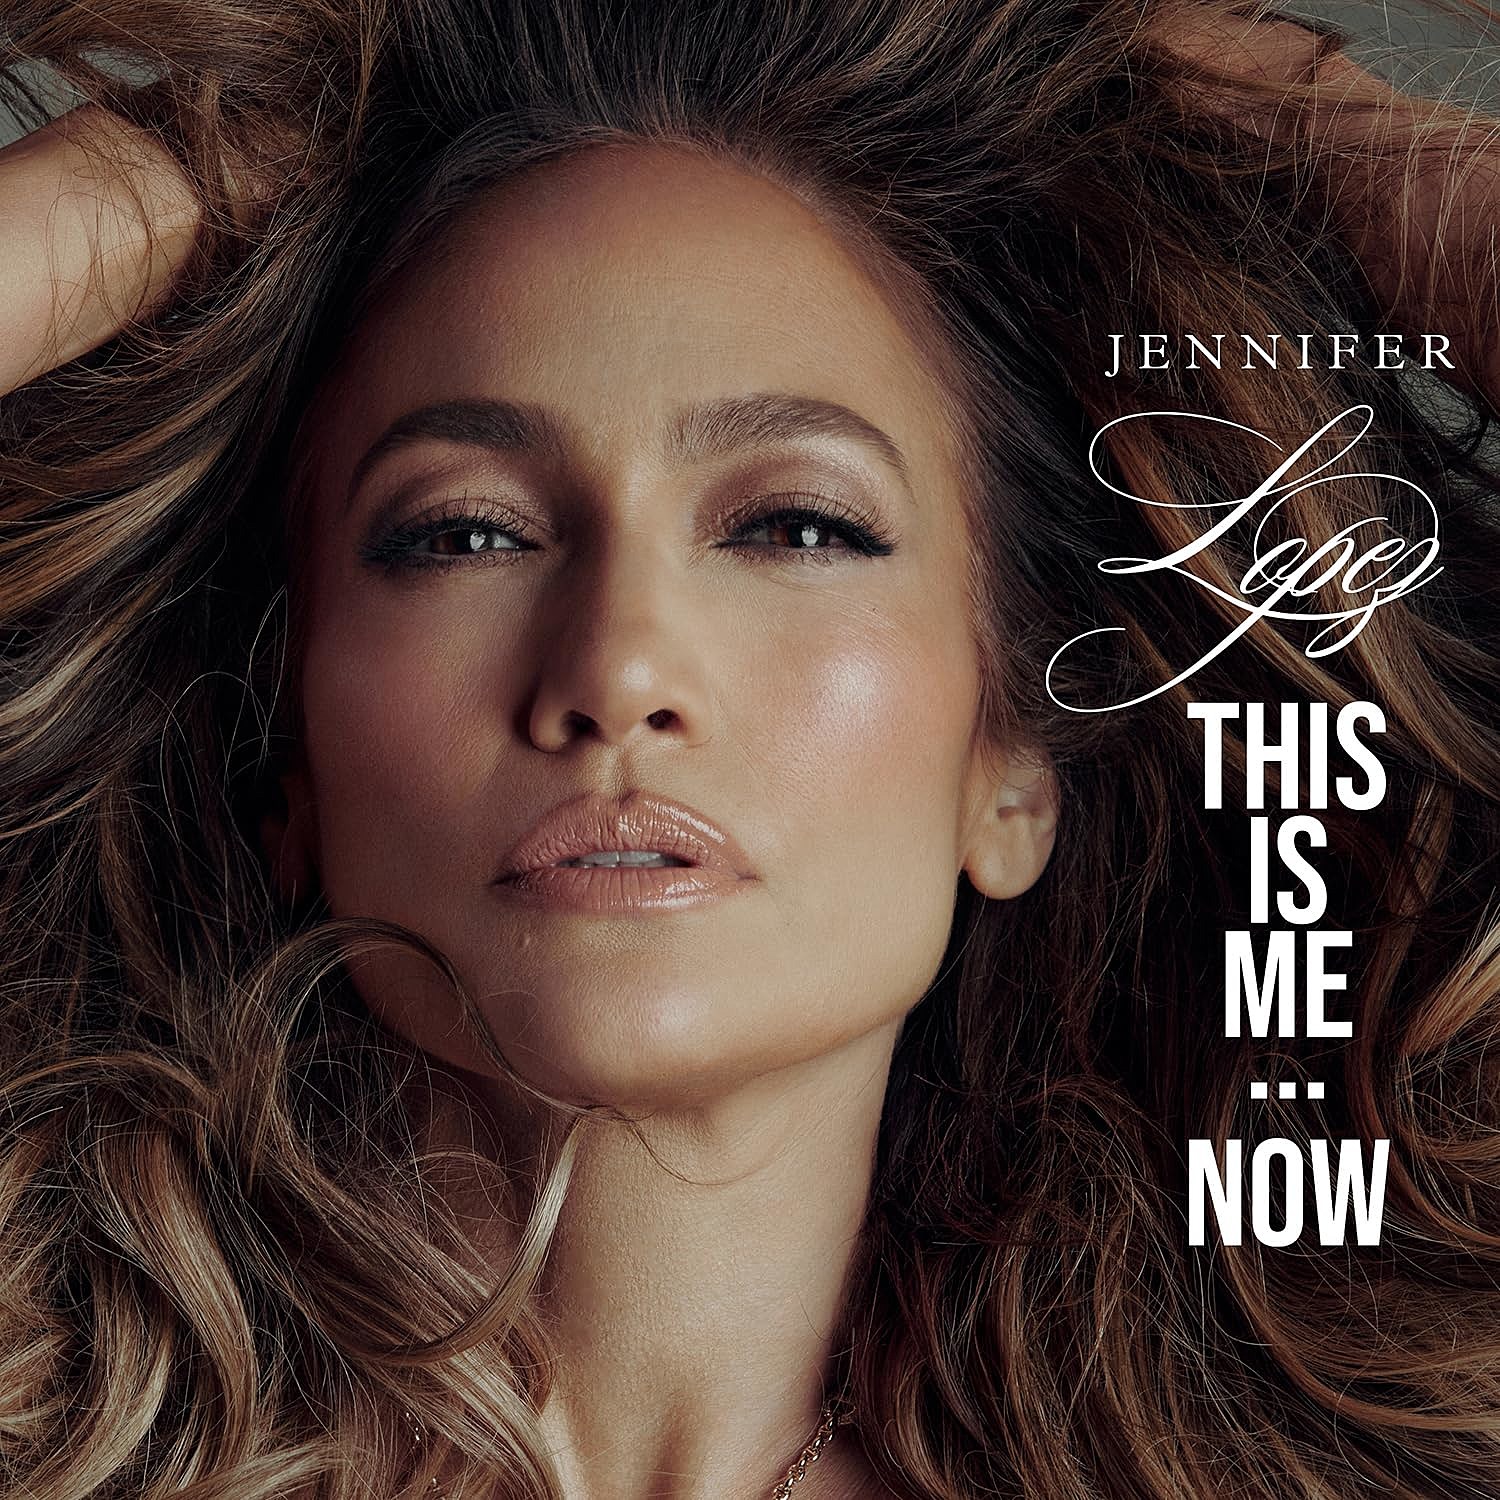 This is Me... Now by Jennifer Lopez